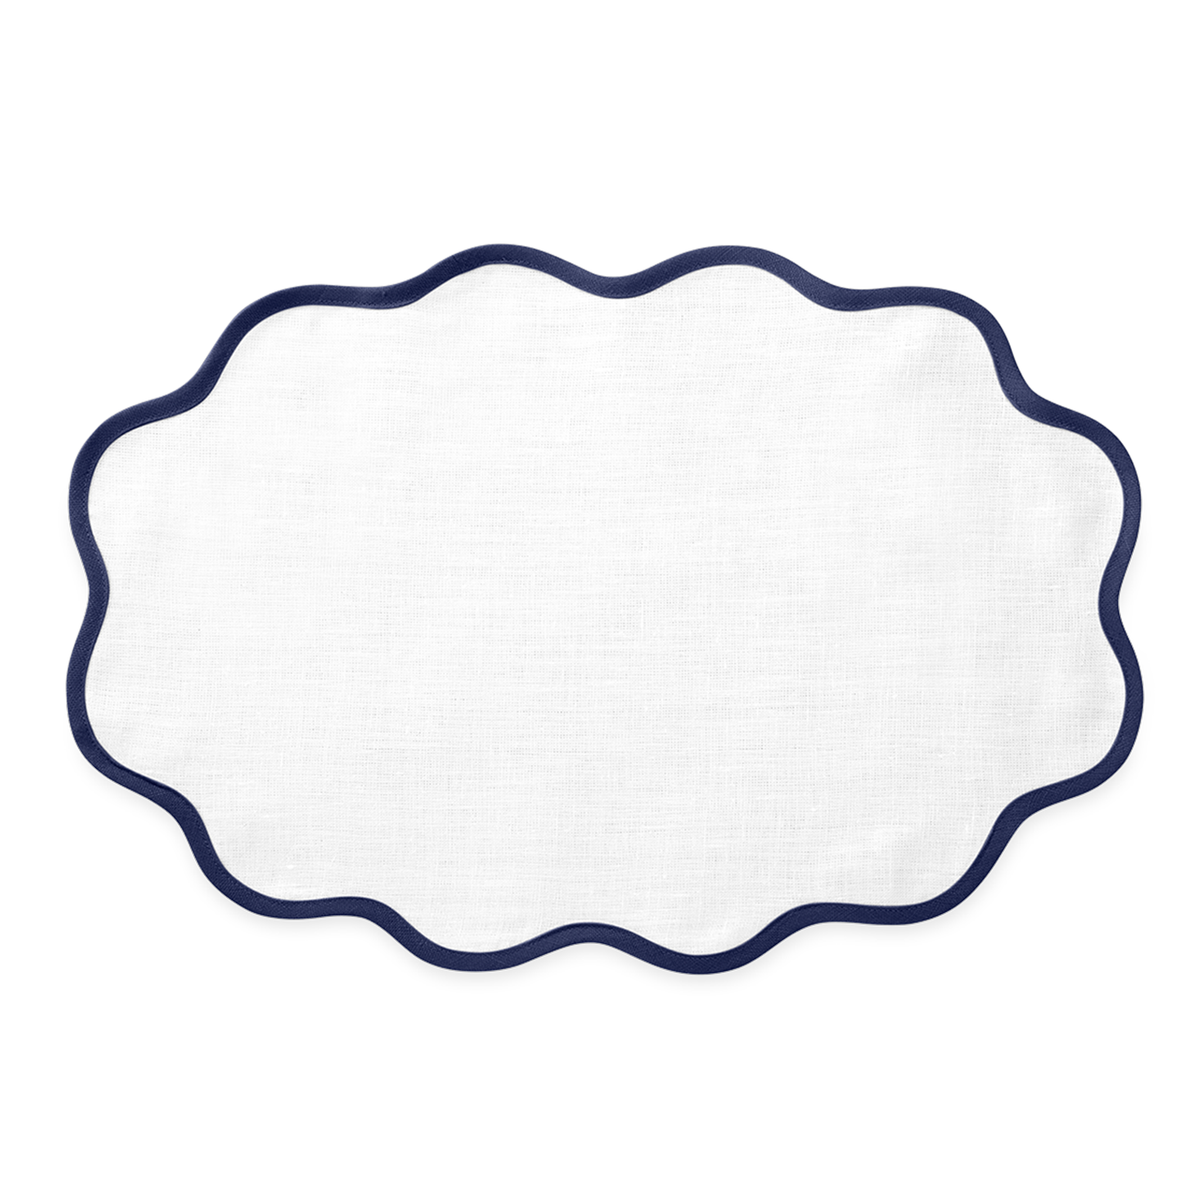 Oval Placemat of Matouk Scallop Edge Table Linens in Color Sapphire